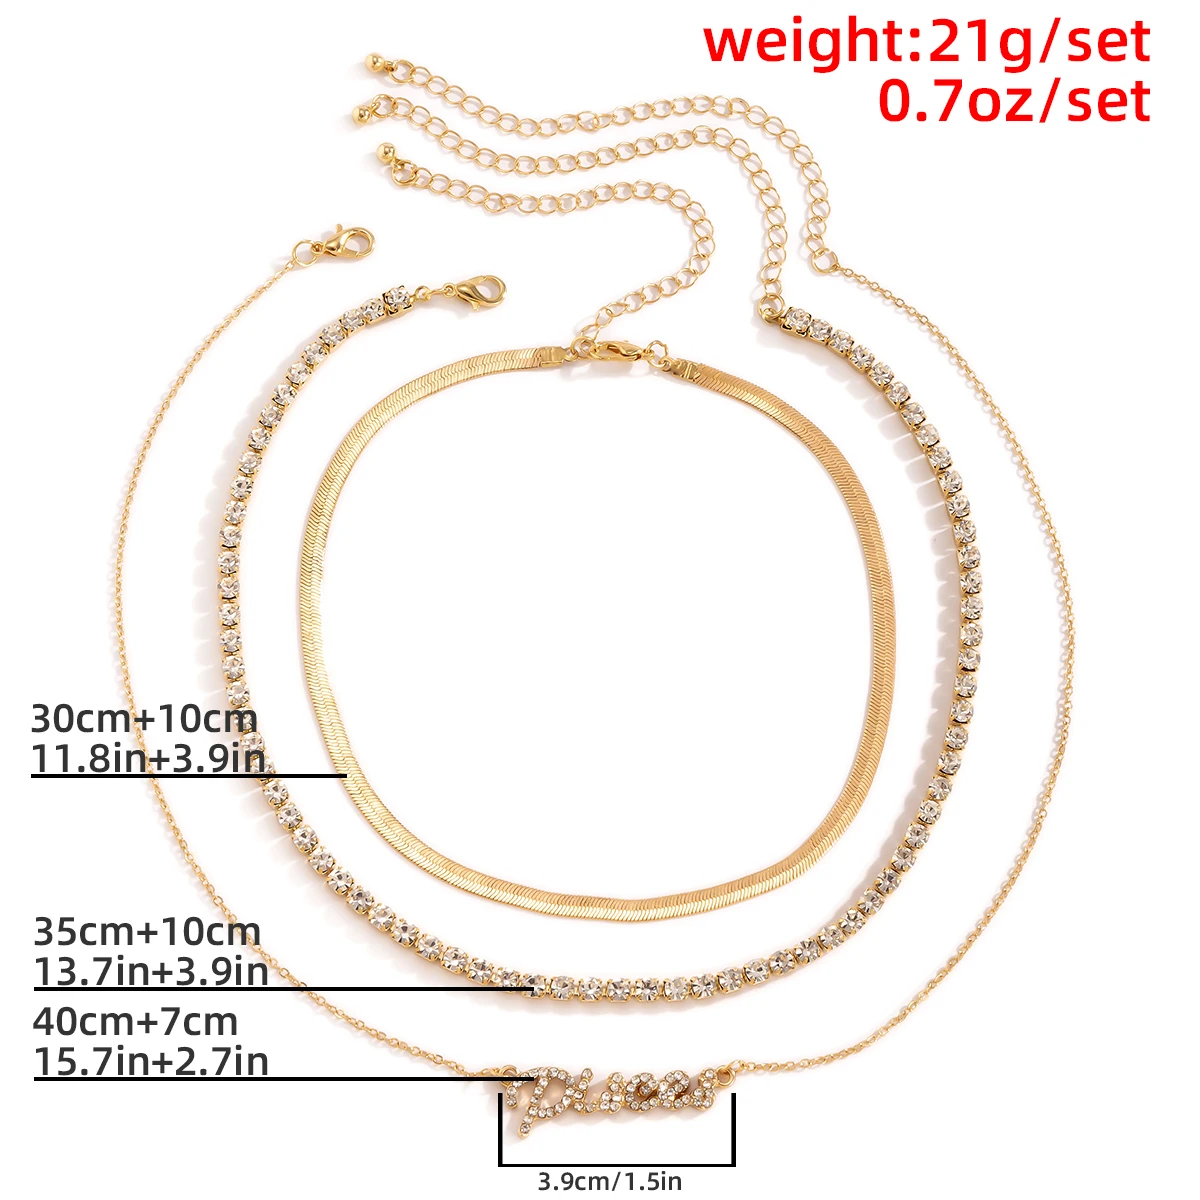 

Salircon Goth Crystal Zodiac Pisces Pendant Choker Necklace Vintage Aesthetic Multi Layer Chains Necklace Kpop Jewelry Gift 2021